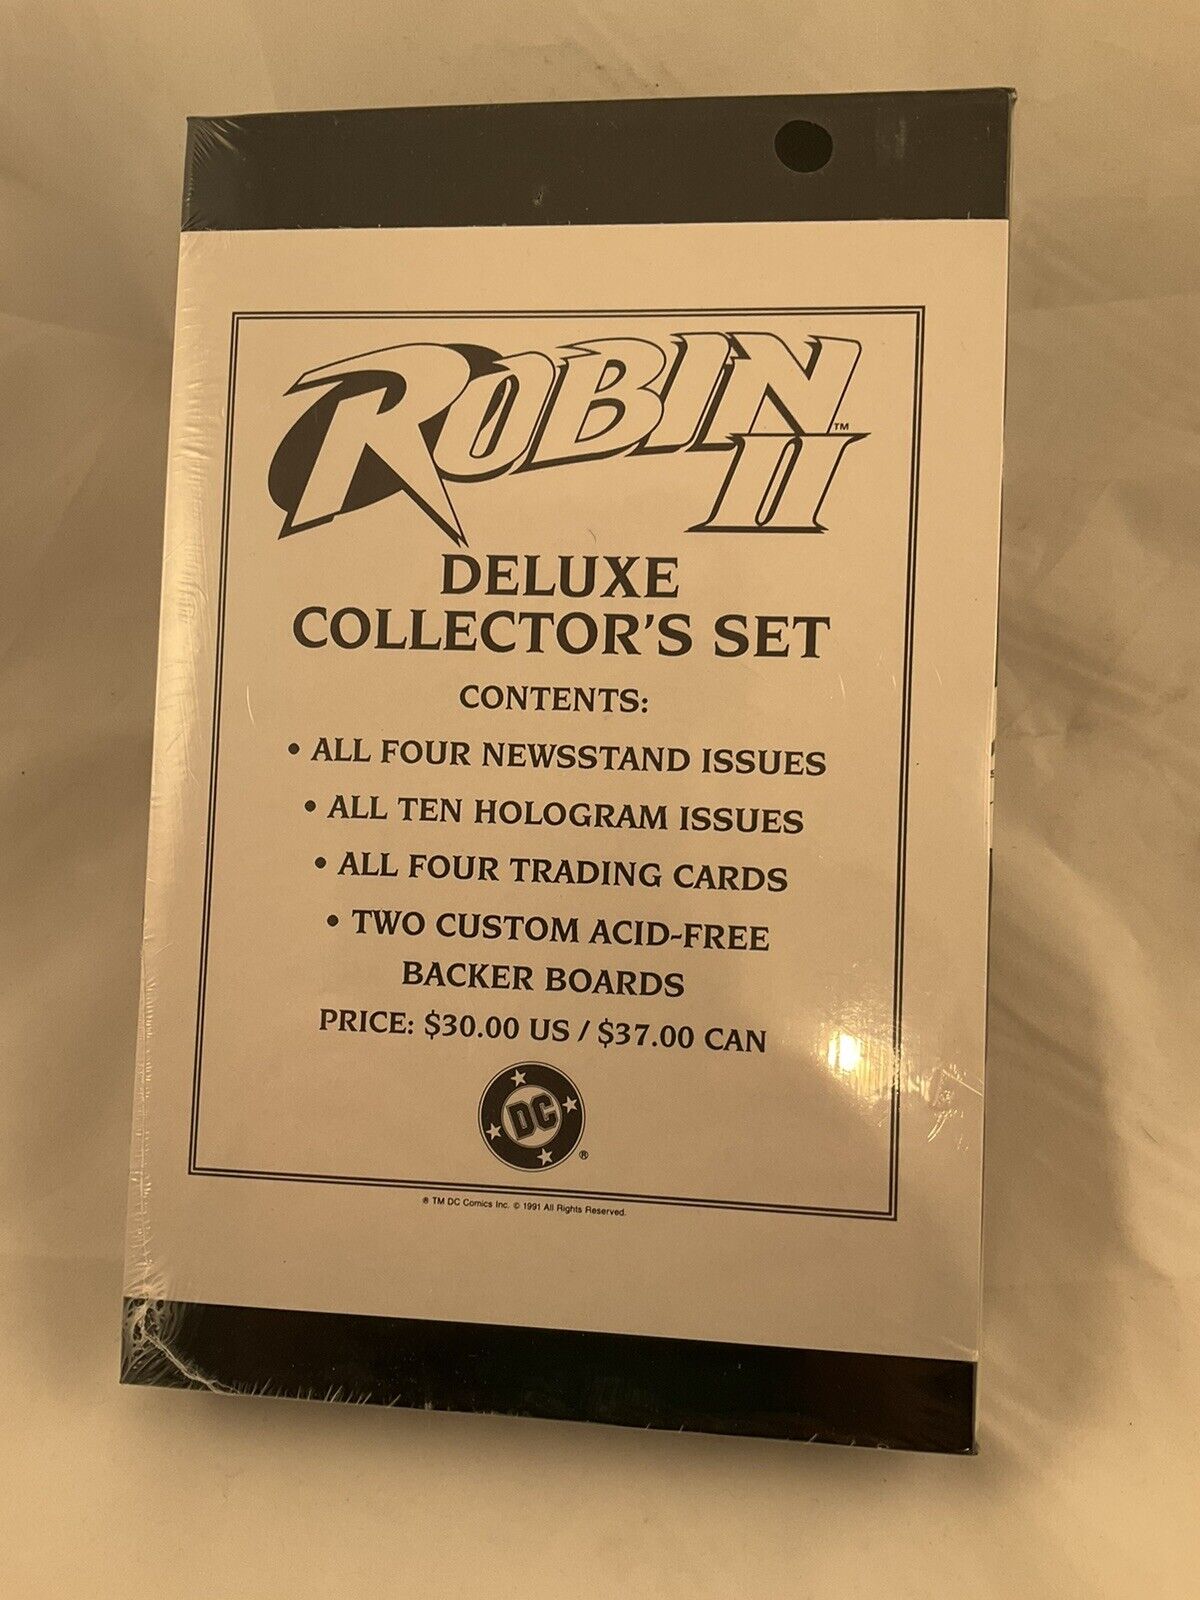 ROBIN 2 DELUXE COLLECTOR'S SET 4 ISSUES, 10 HOLOGRAMS, 4 CARDS, 2 BOARDS SEALED